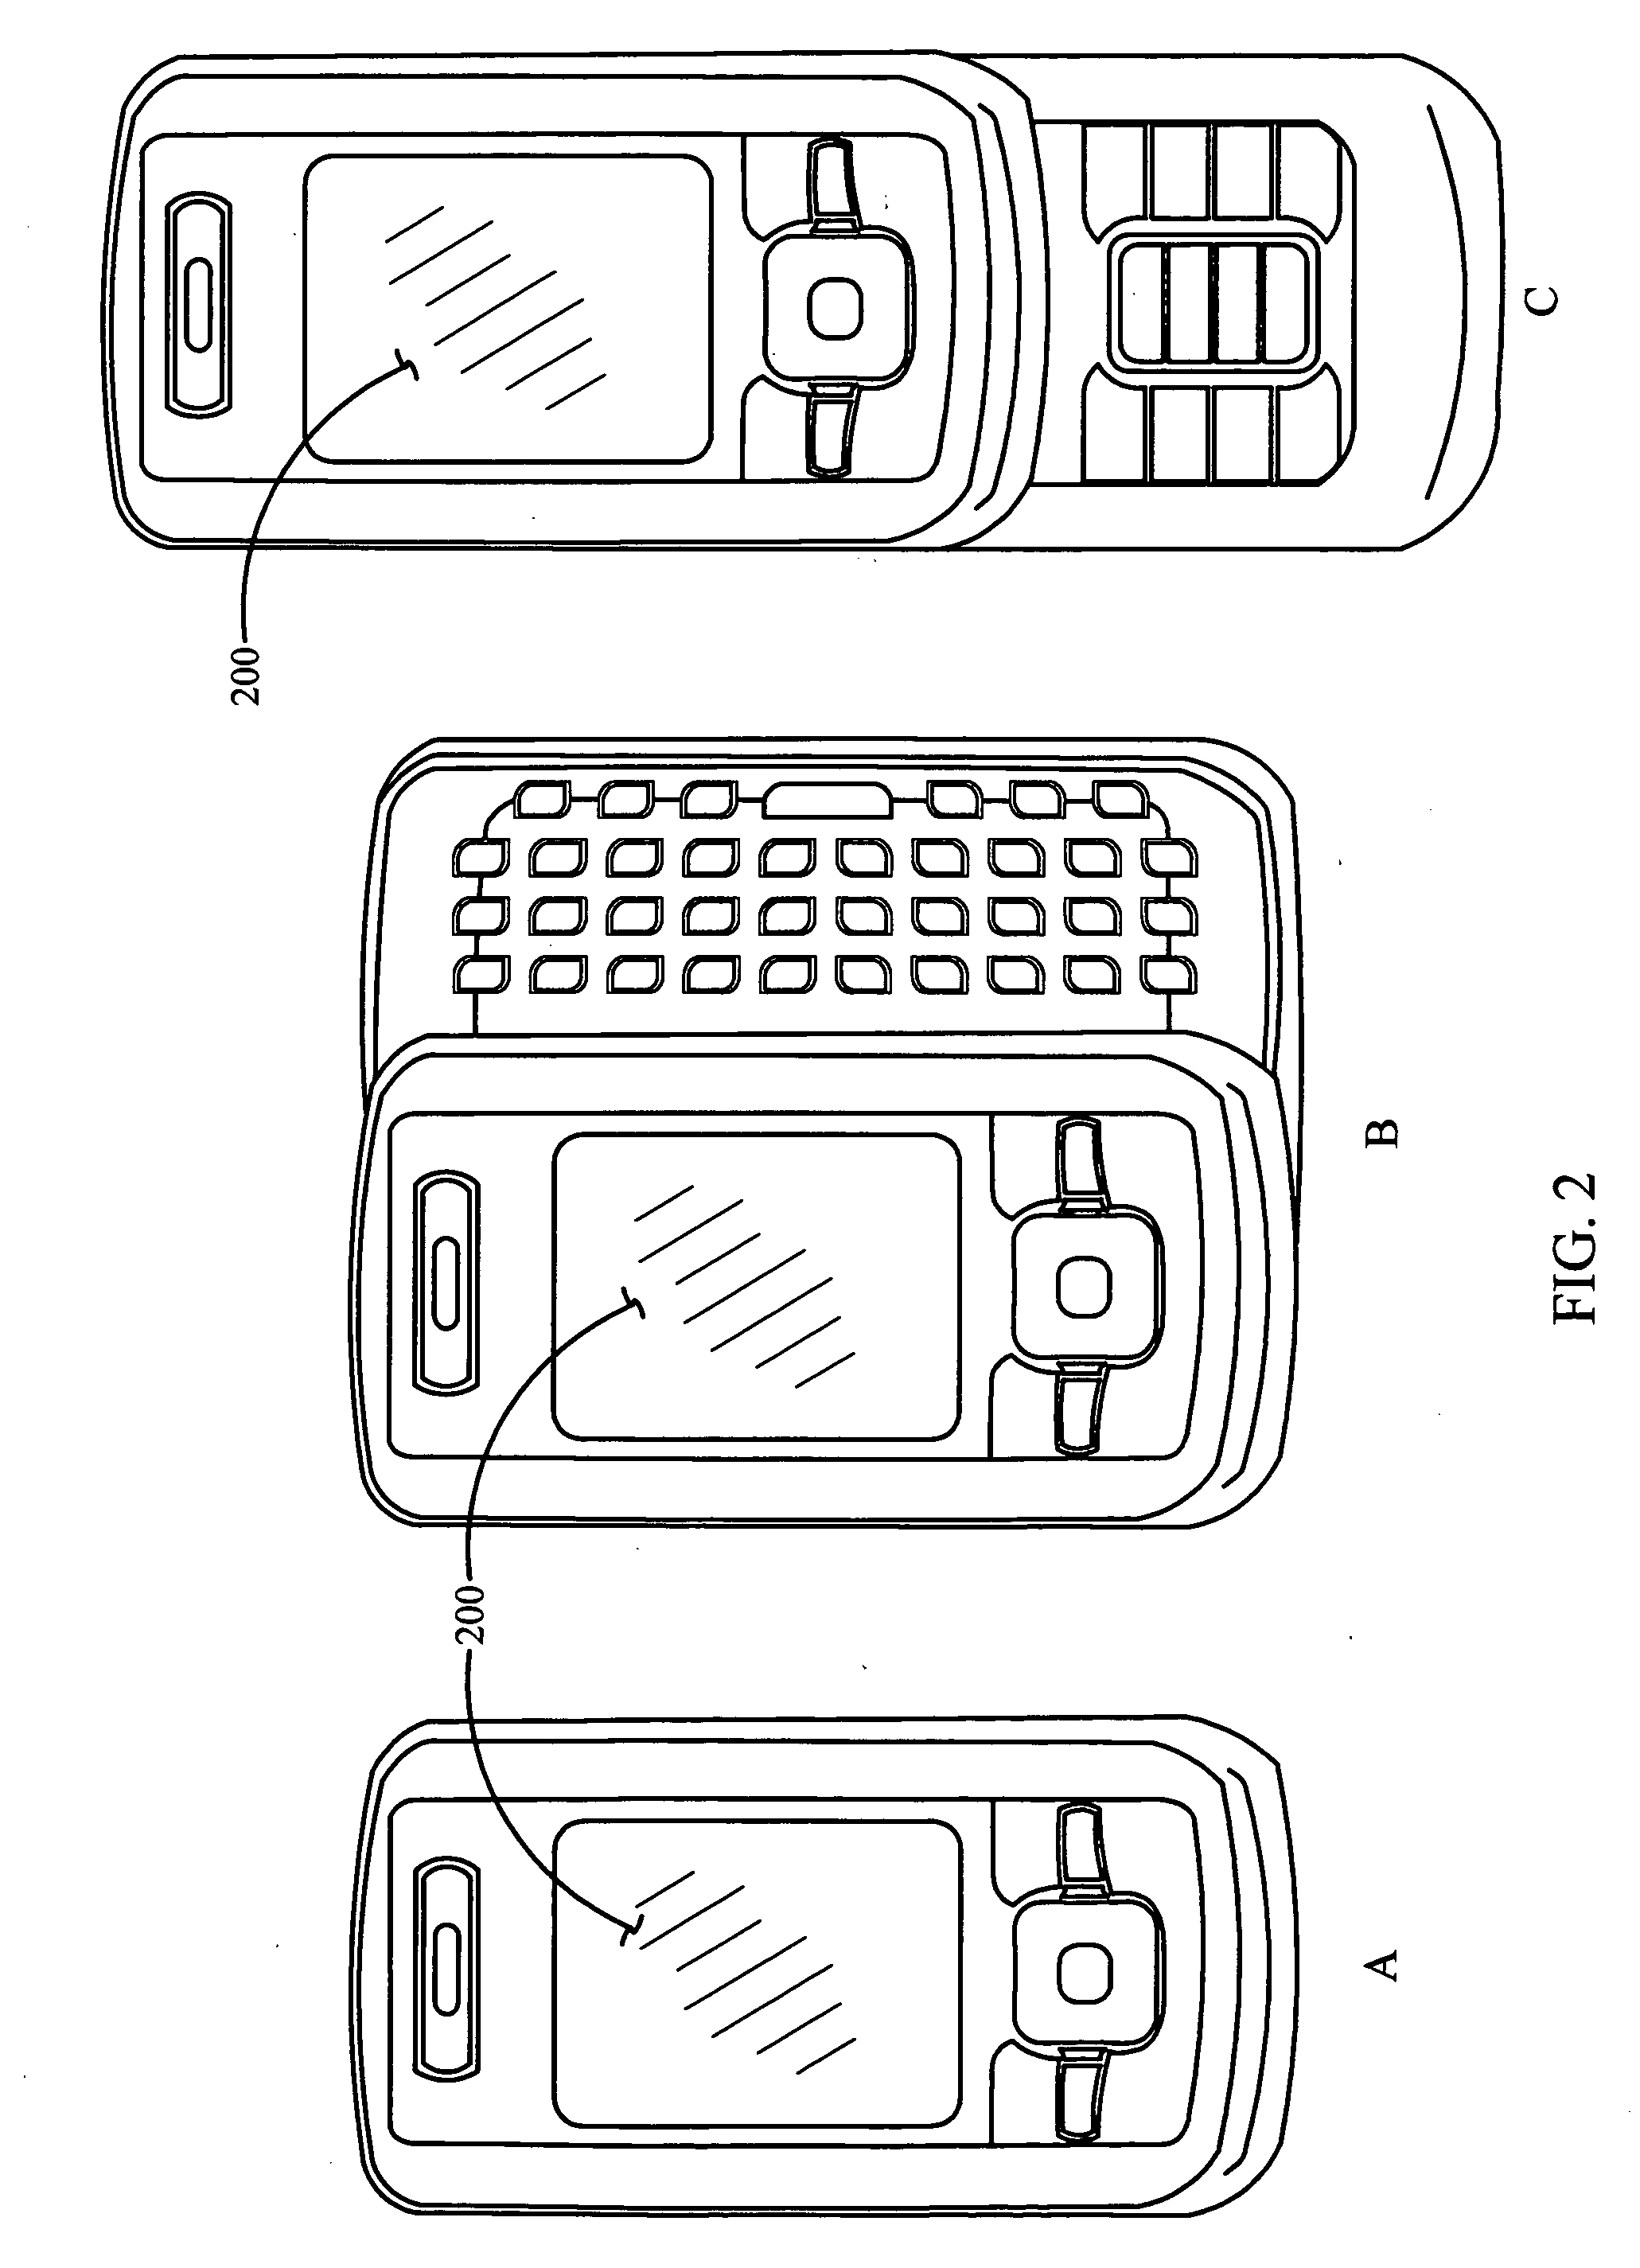 Portable device with versatile keyboard